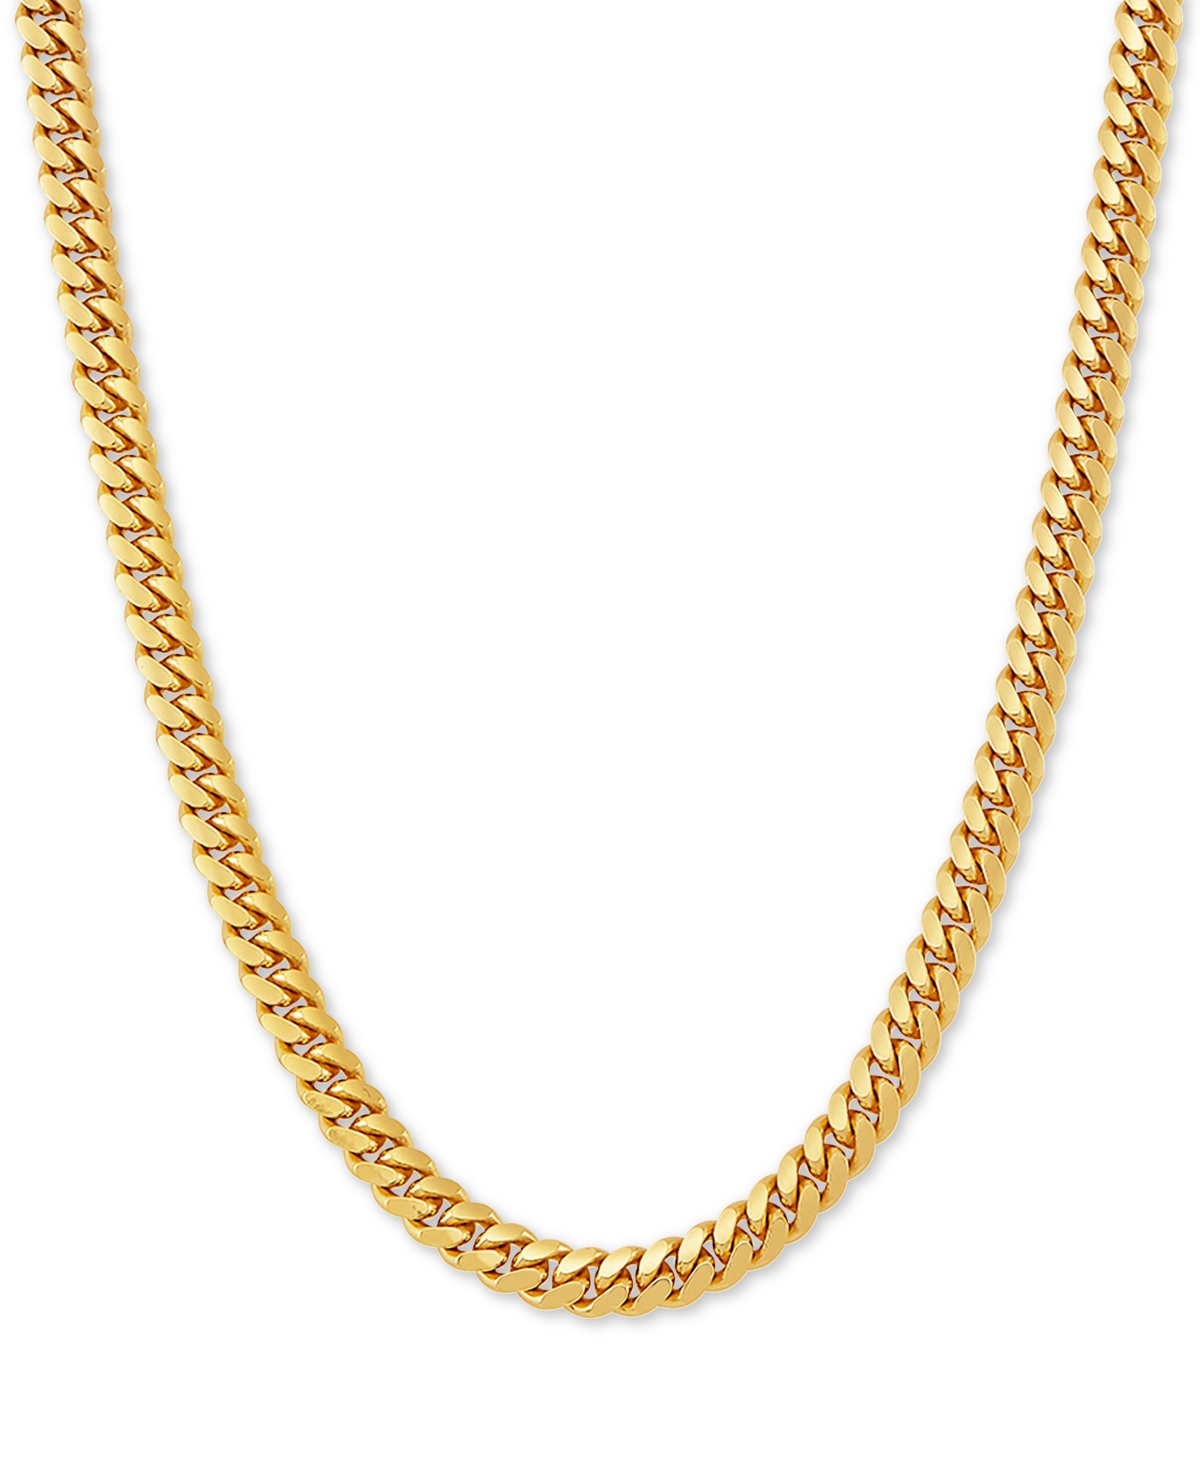 Cuban Link 22" Chain Necklace in 18k Gold-Plated Sterling Silver - Gold Over Silver